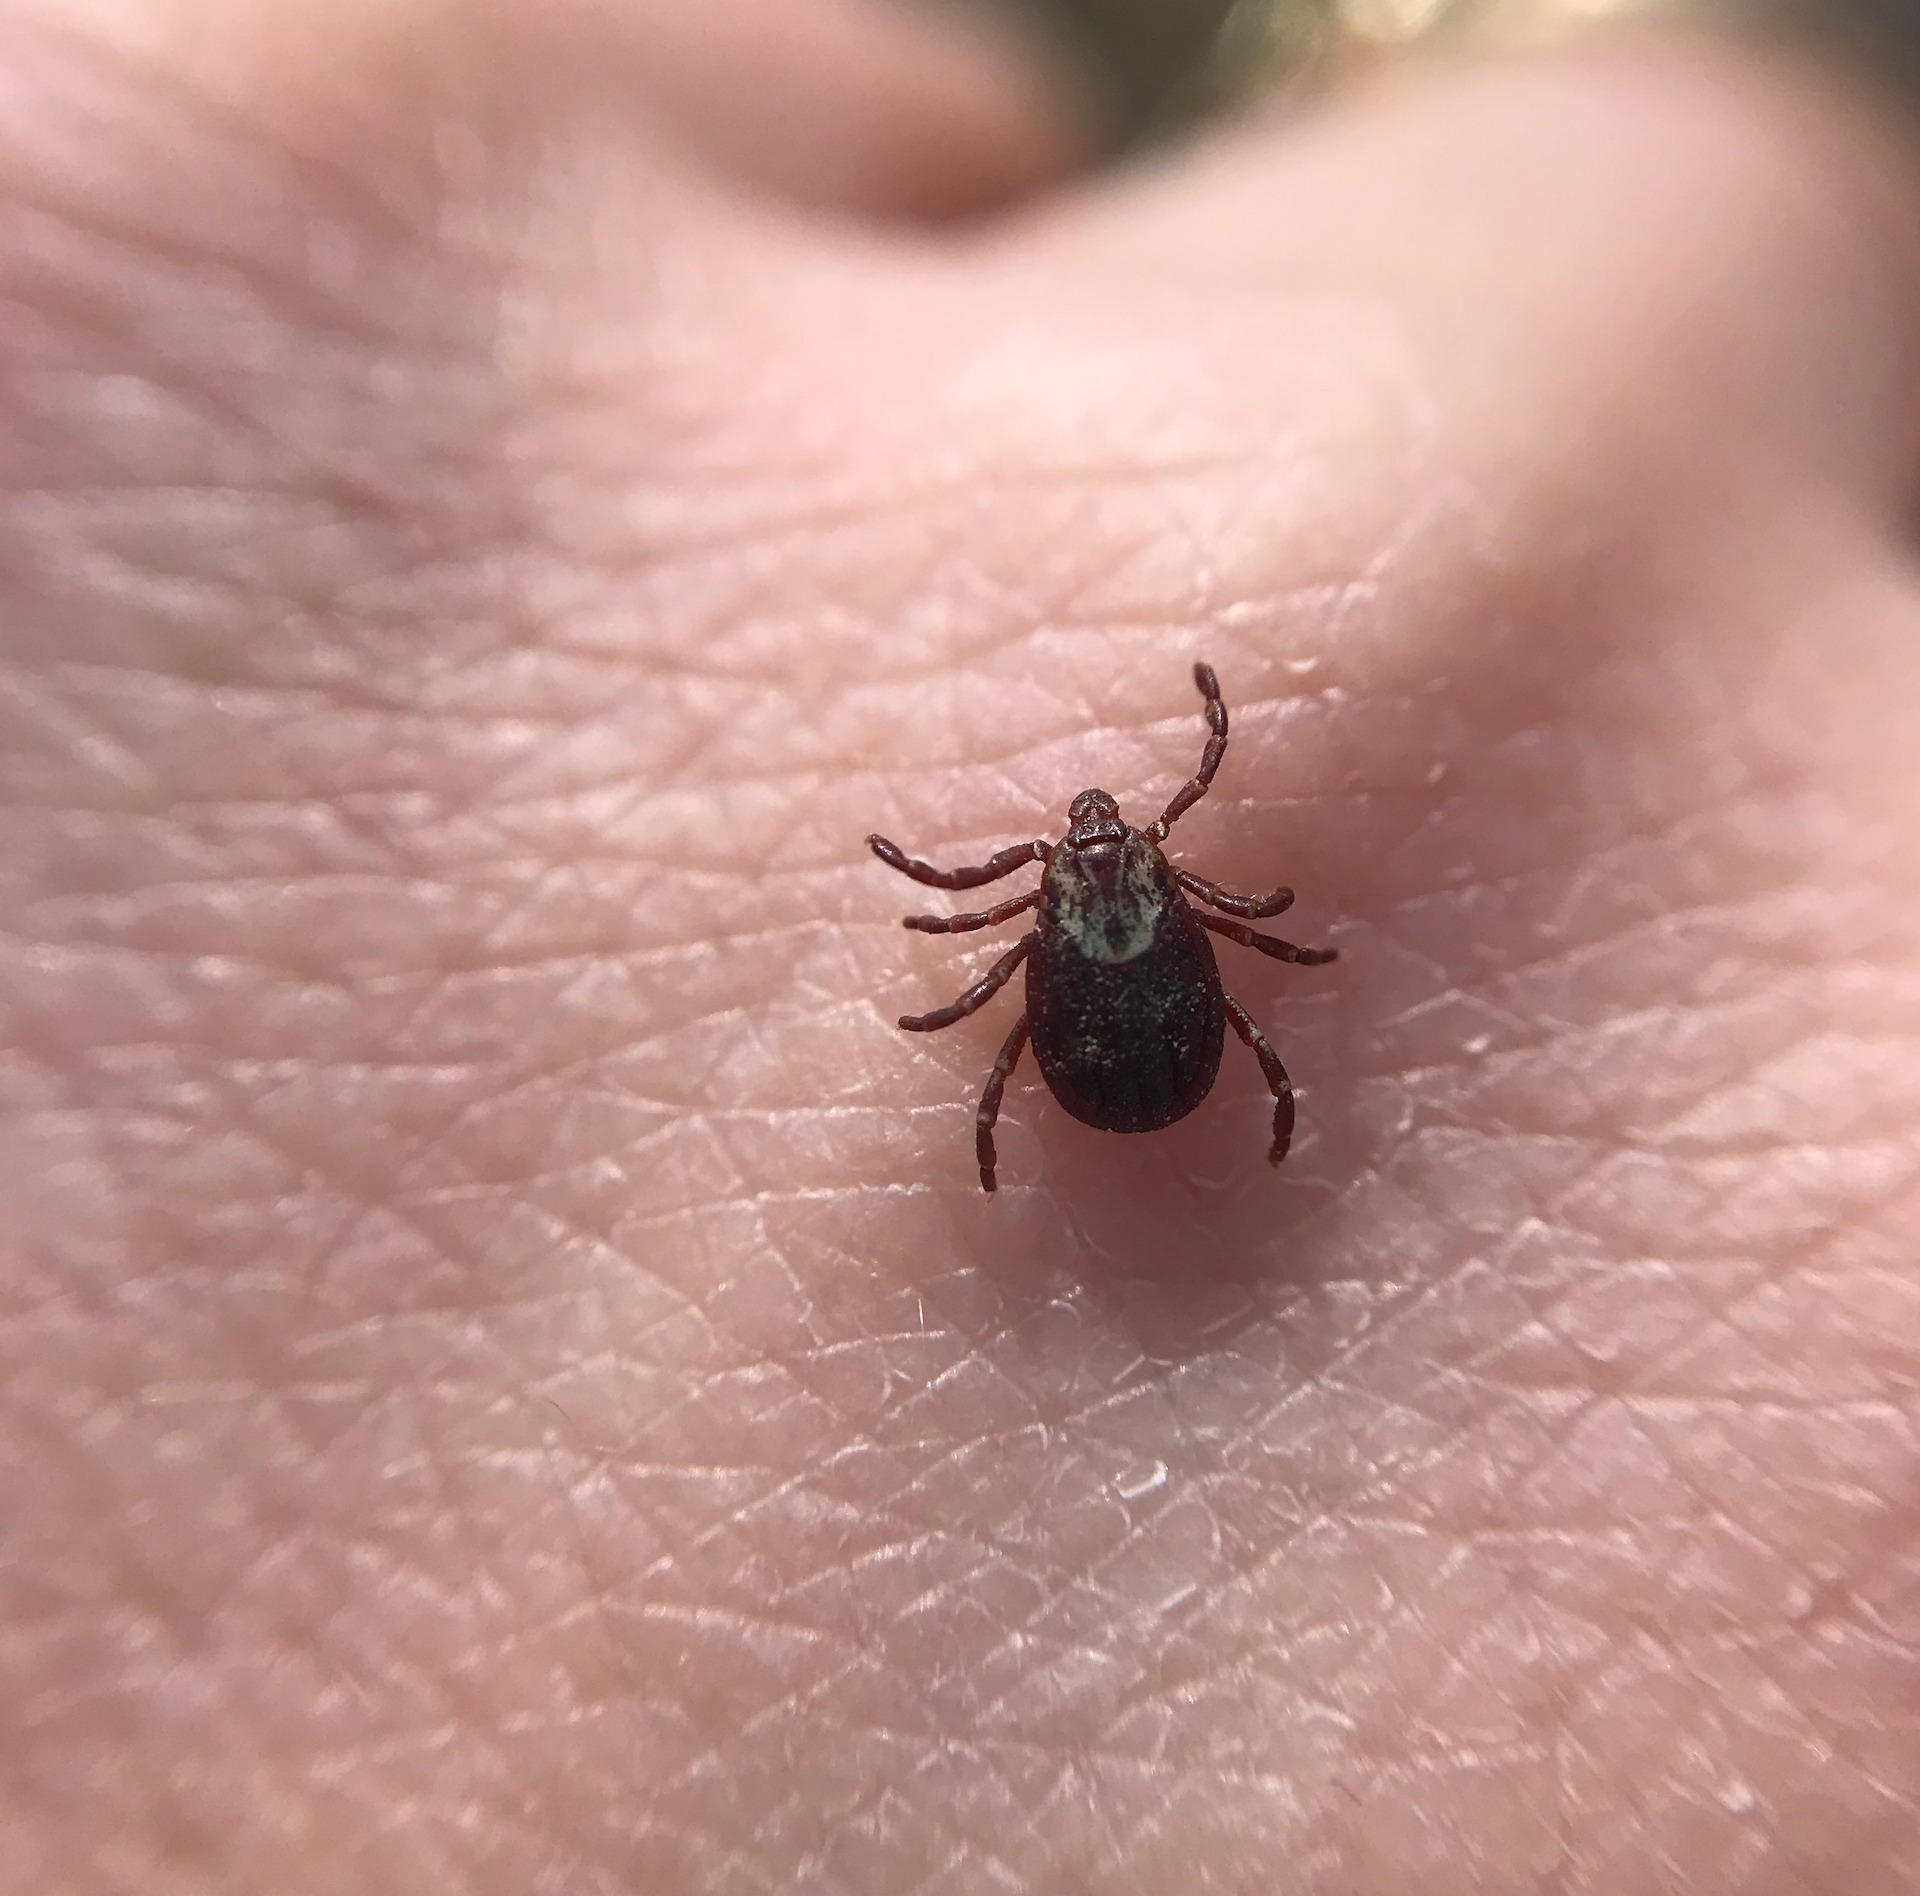 photo of a tick crawling on someone's hand